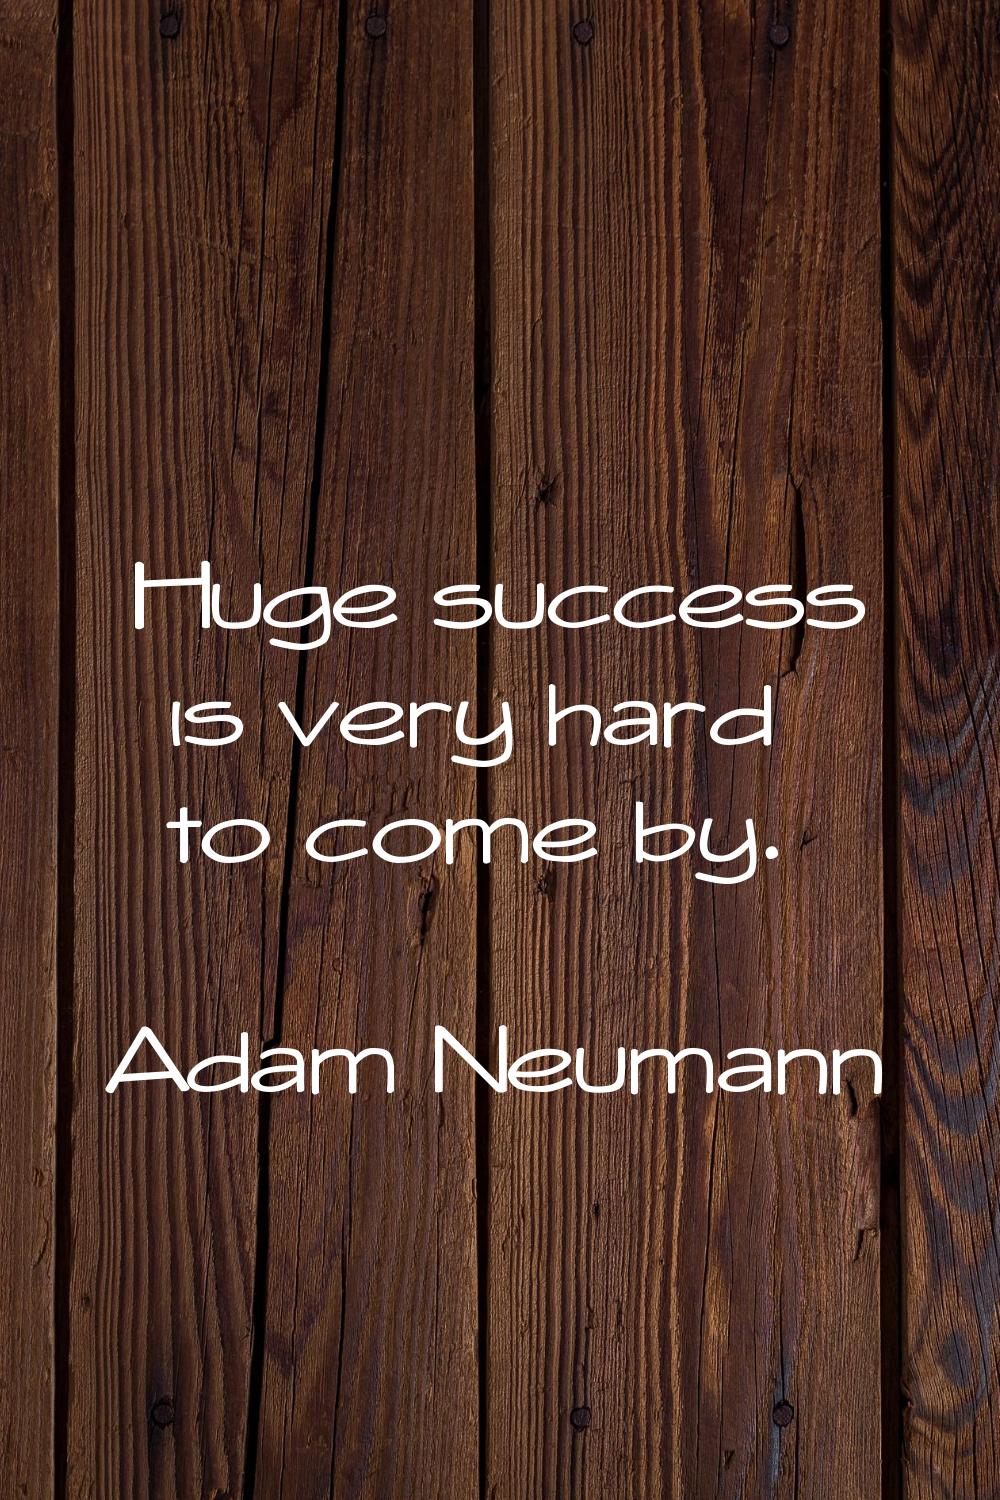 Huge success is very hard to come by.